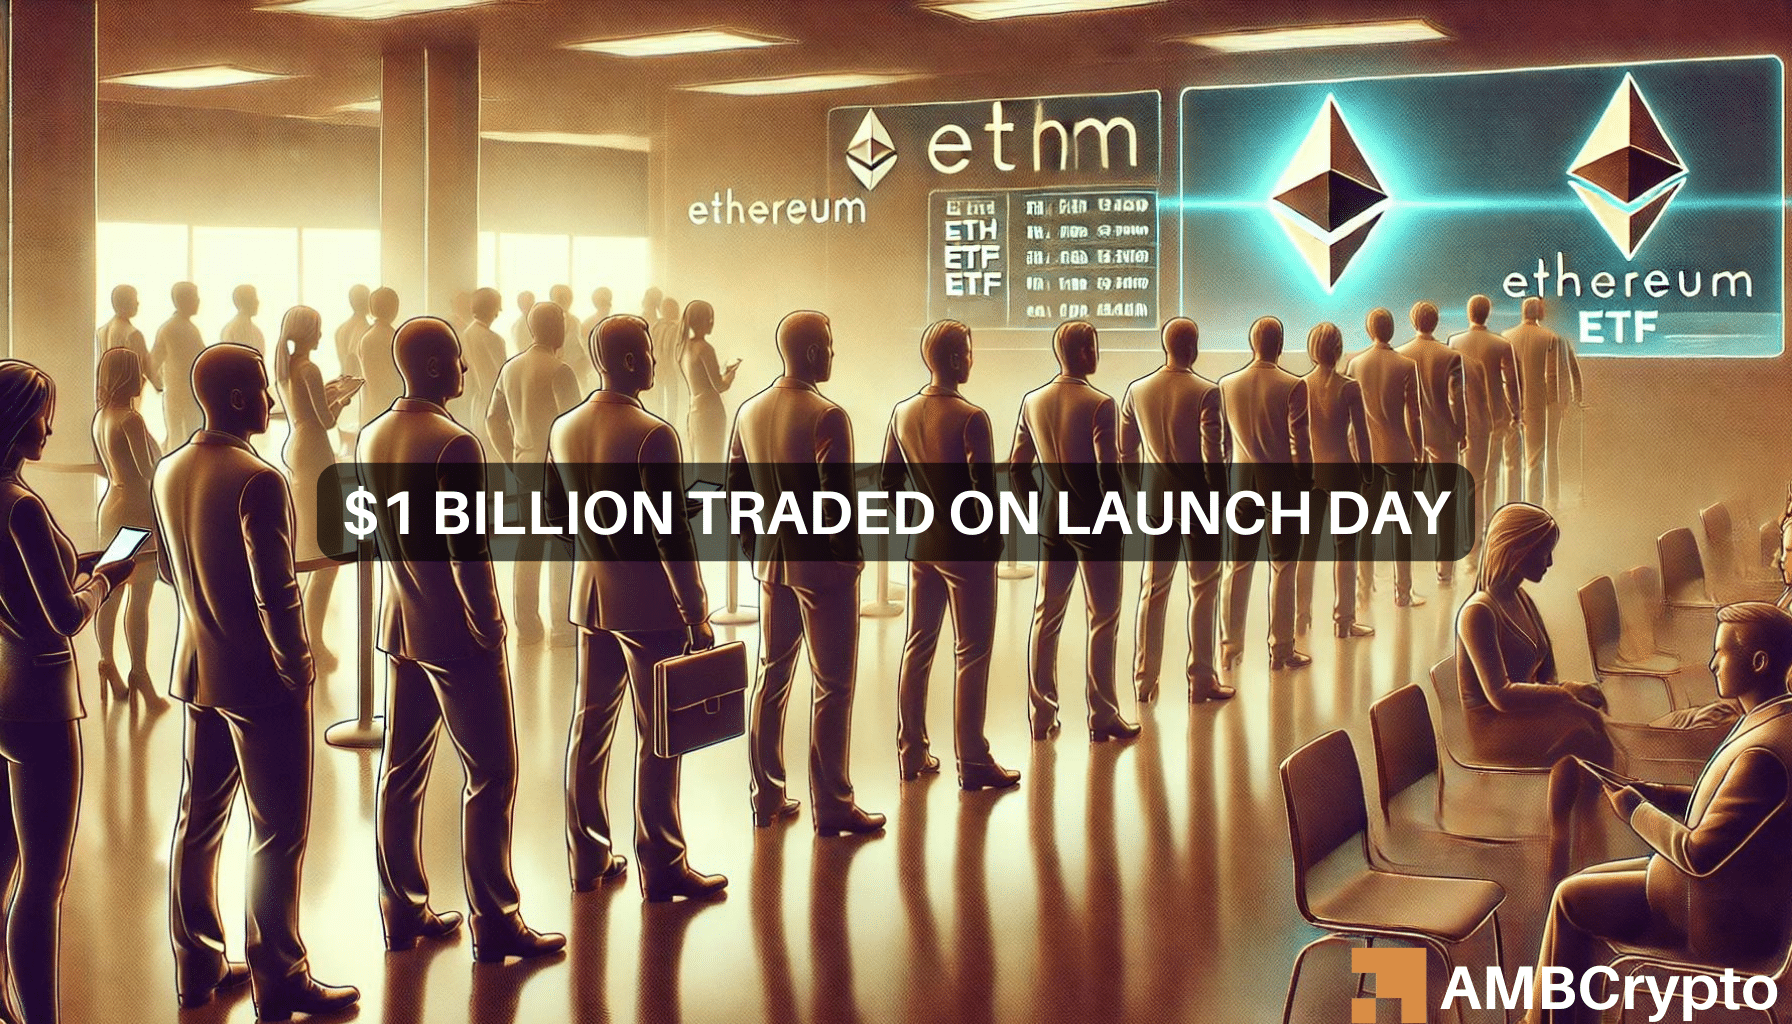 Ethereum ETF frenzy: $1B traded in 24 hours – What’s next?